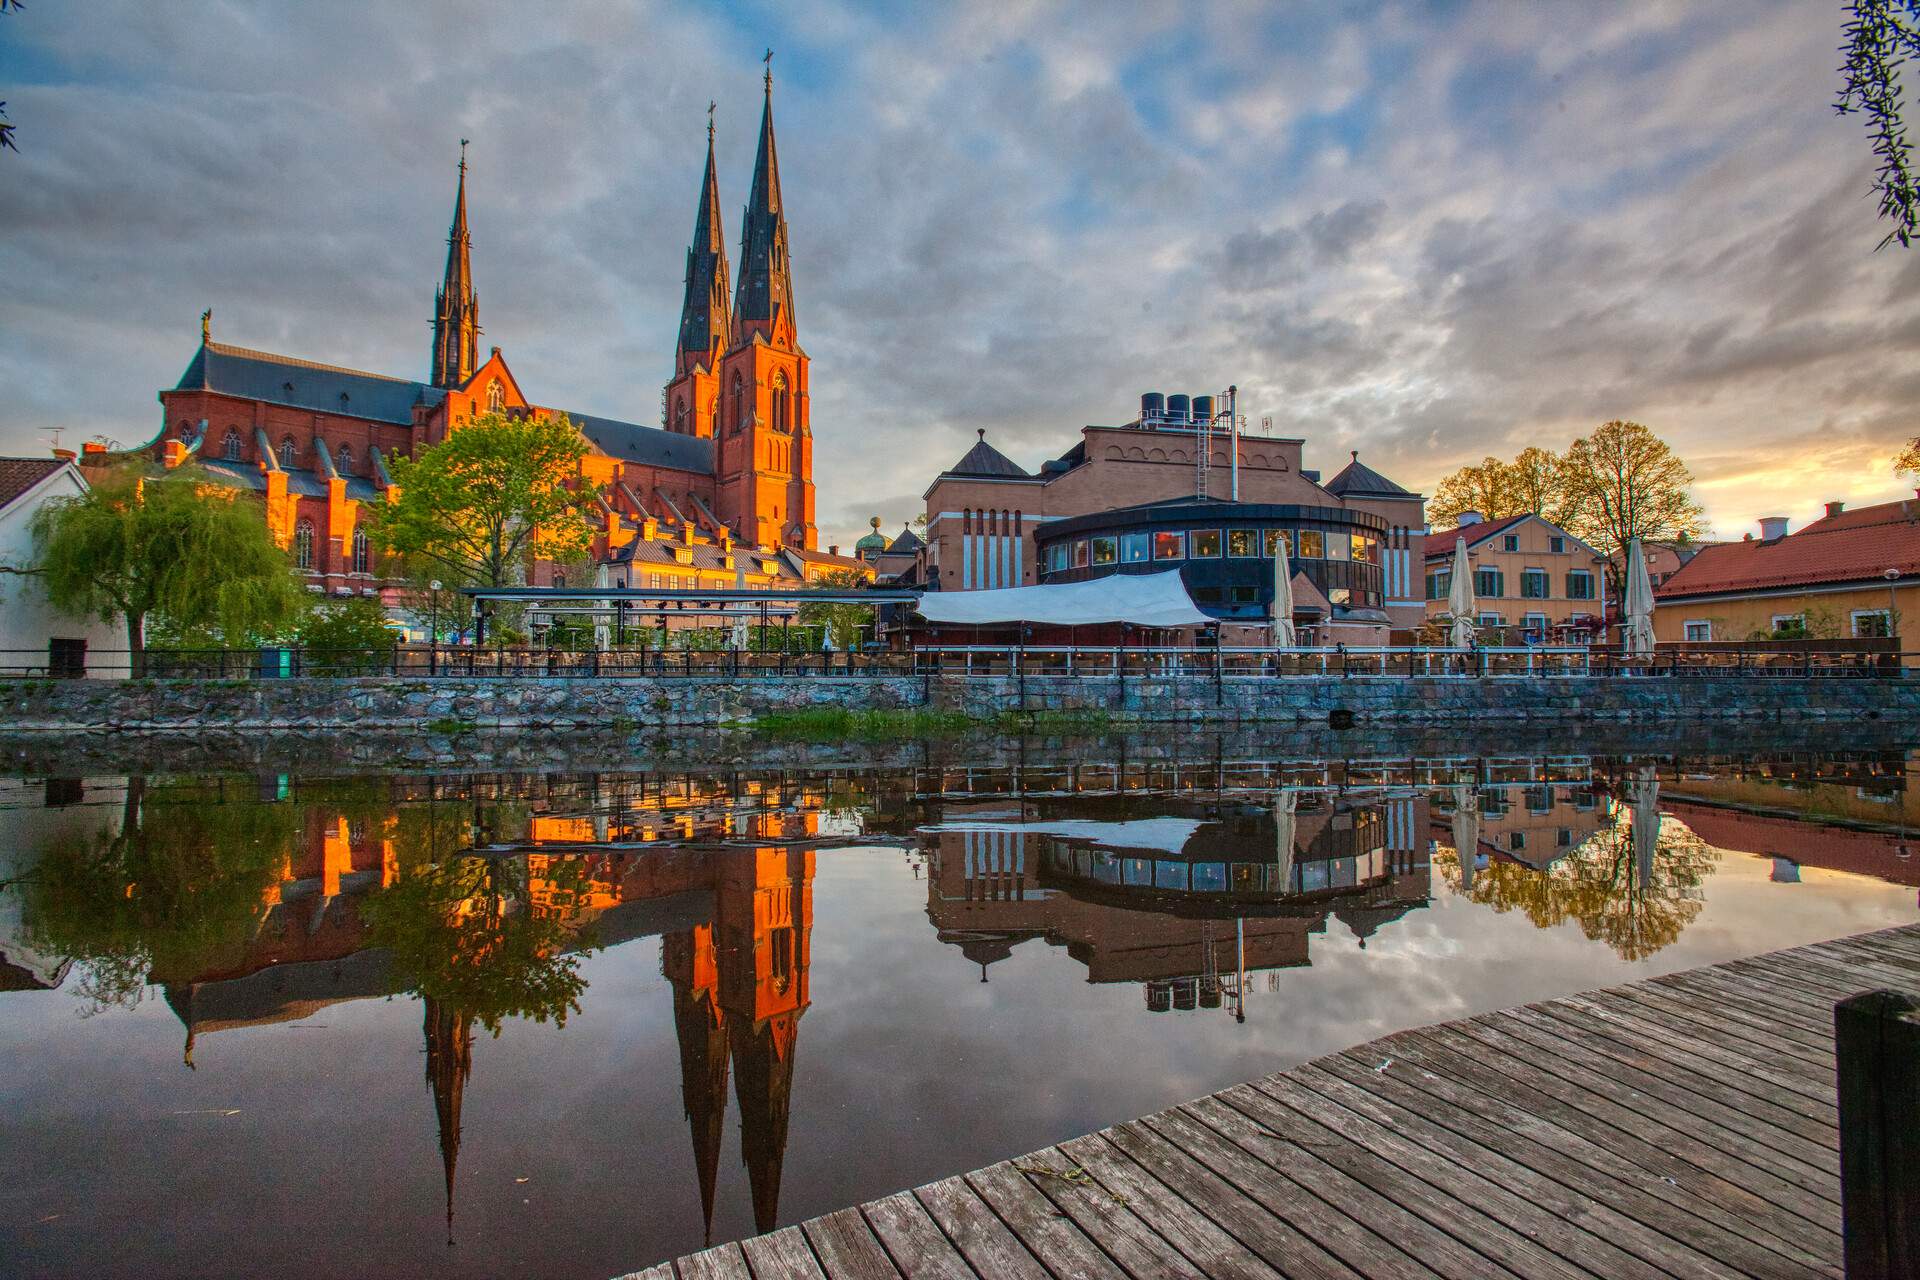 A two-towered church with three spires lies beside a building reflected on the river's surface.
